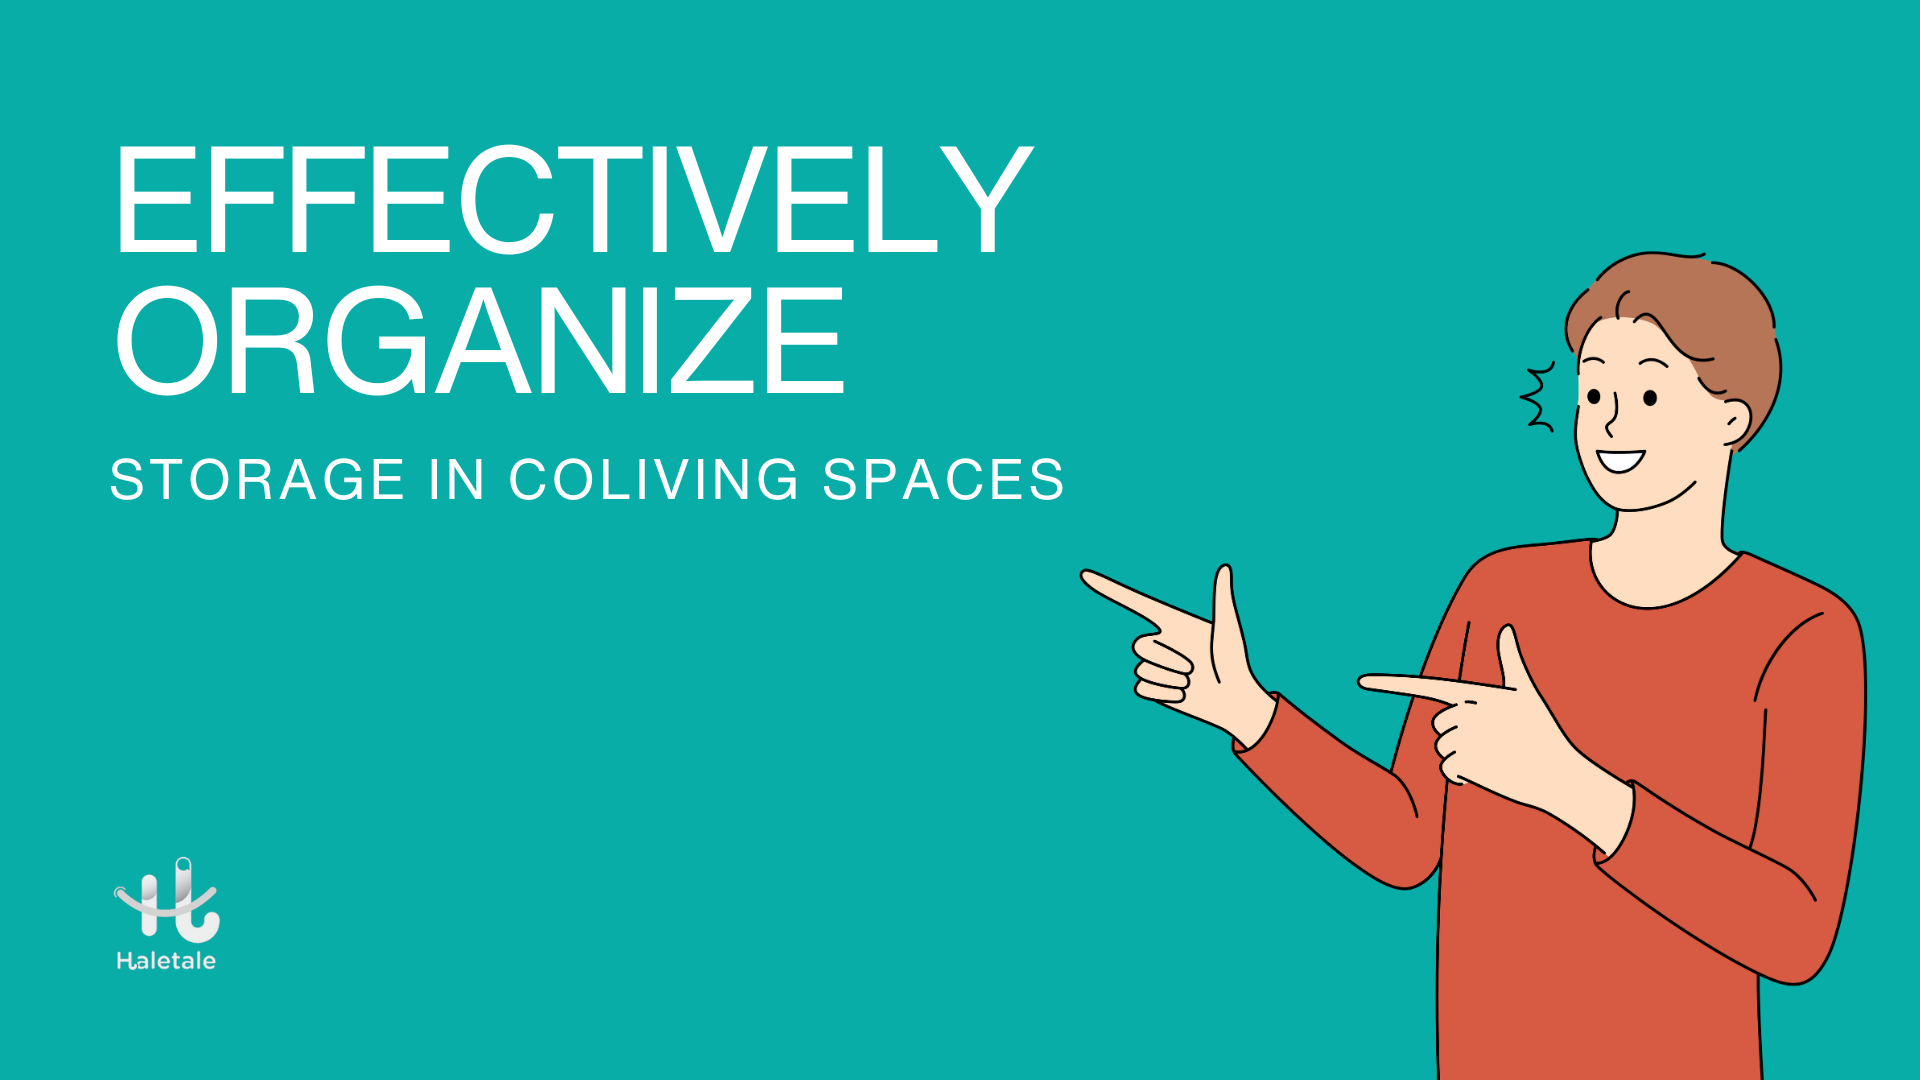 How To Effectively Organize Storage In Co living Spaces